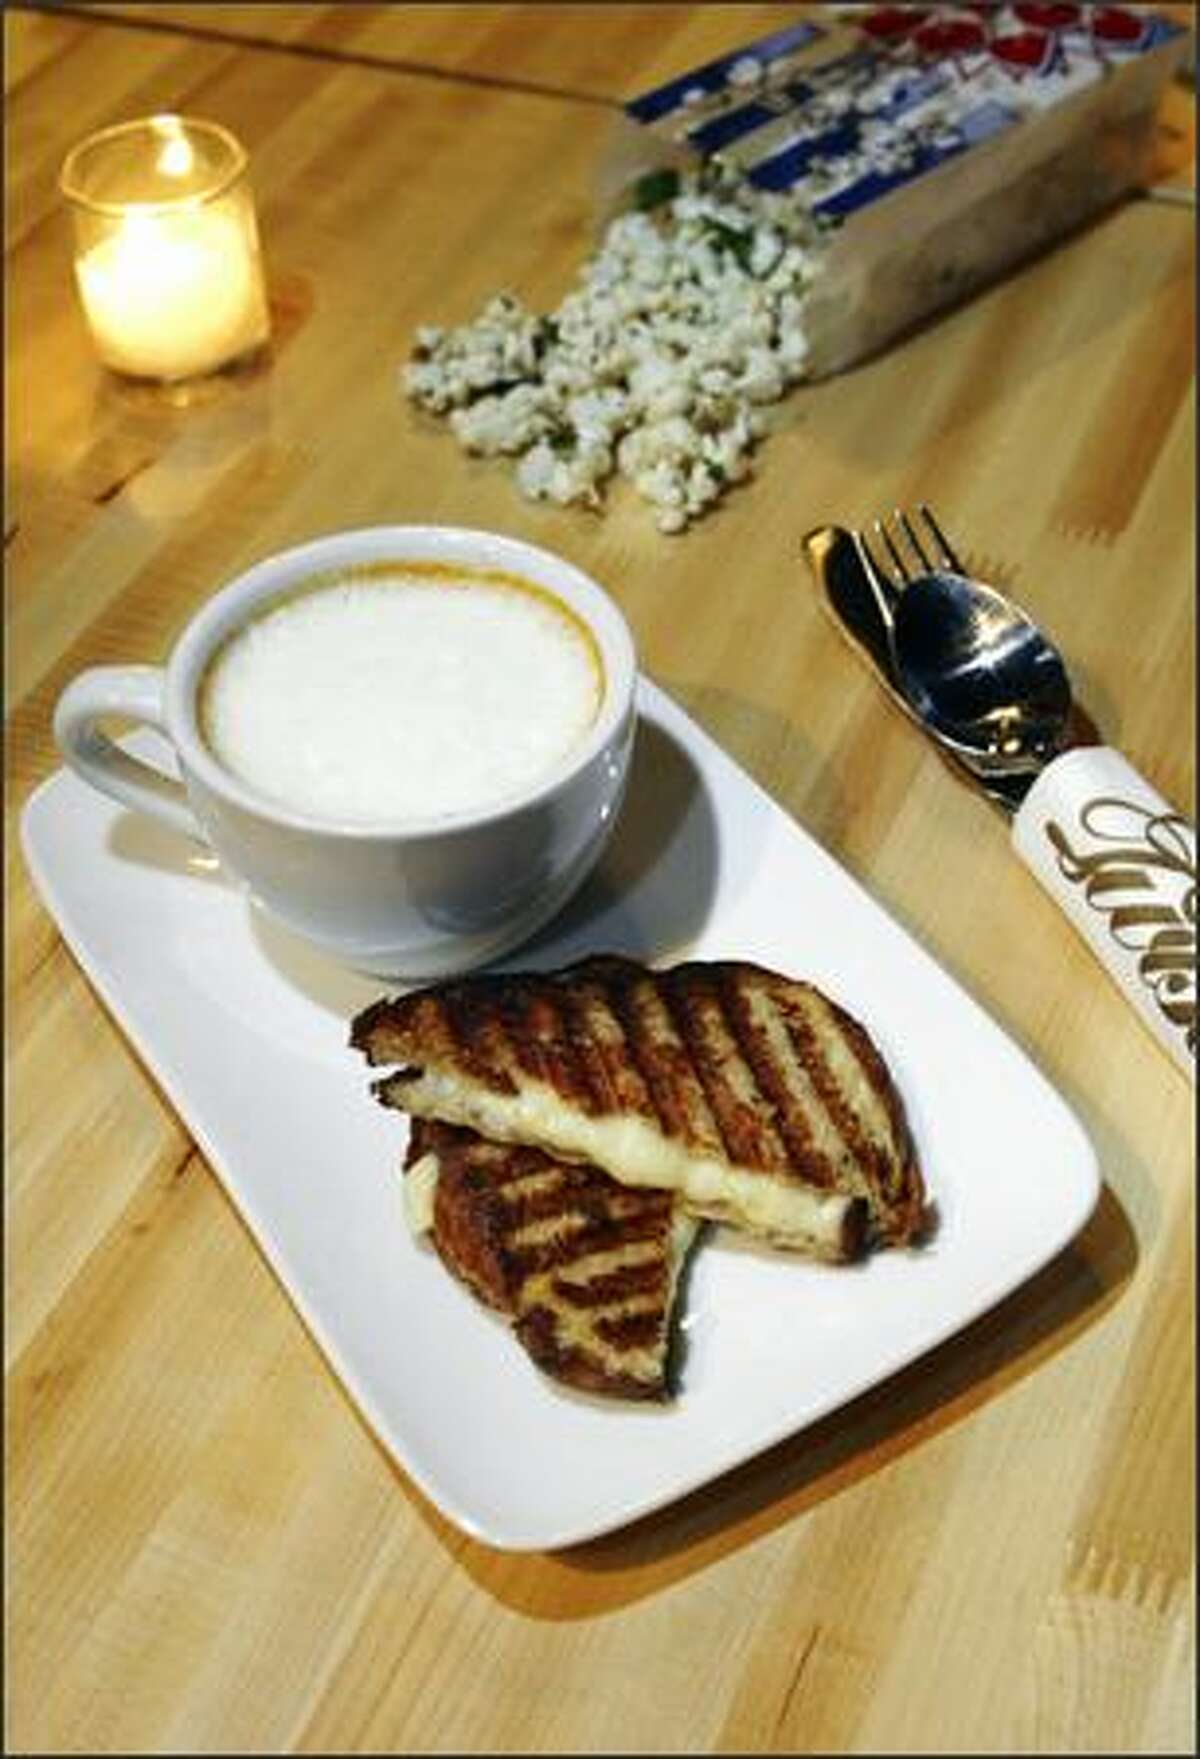 Tomato Cappuccino at Oliver's Twist is a creamy homemade soup served with a grilled cheese on toasted brioche.